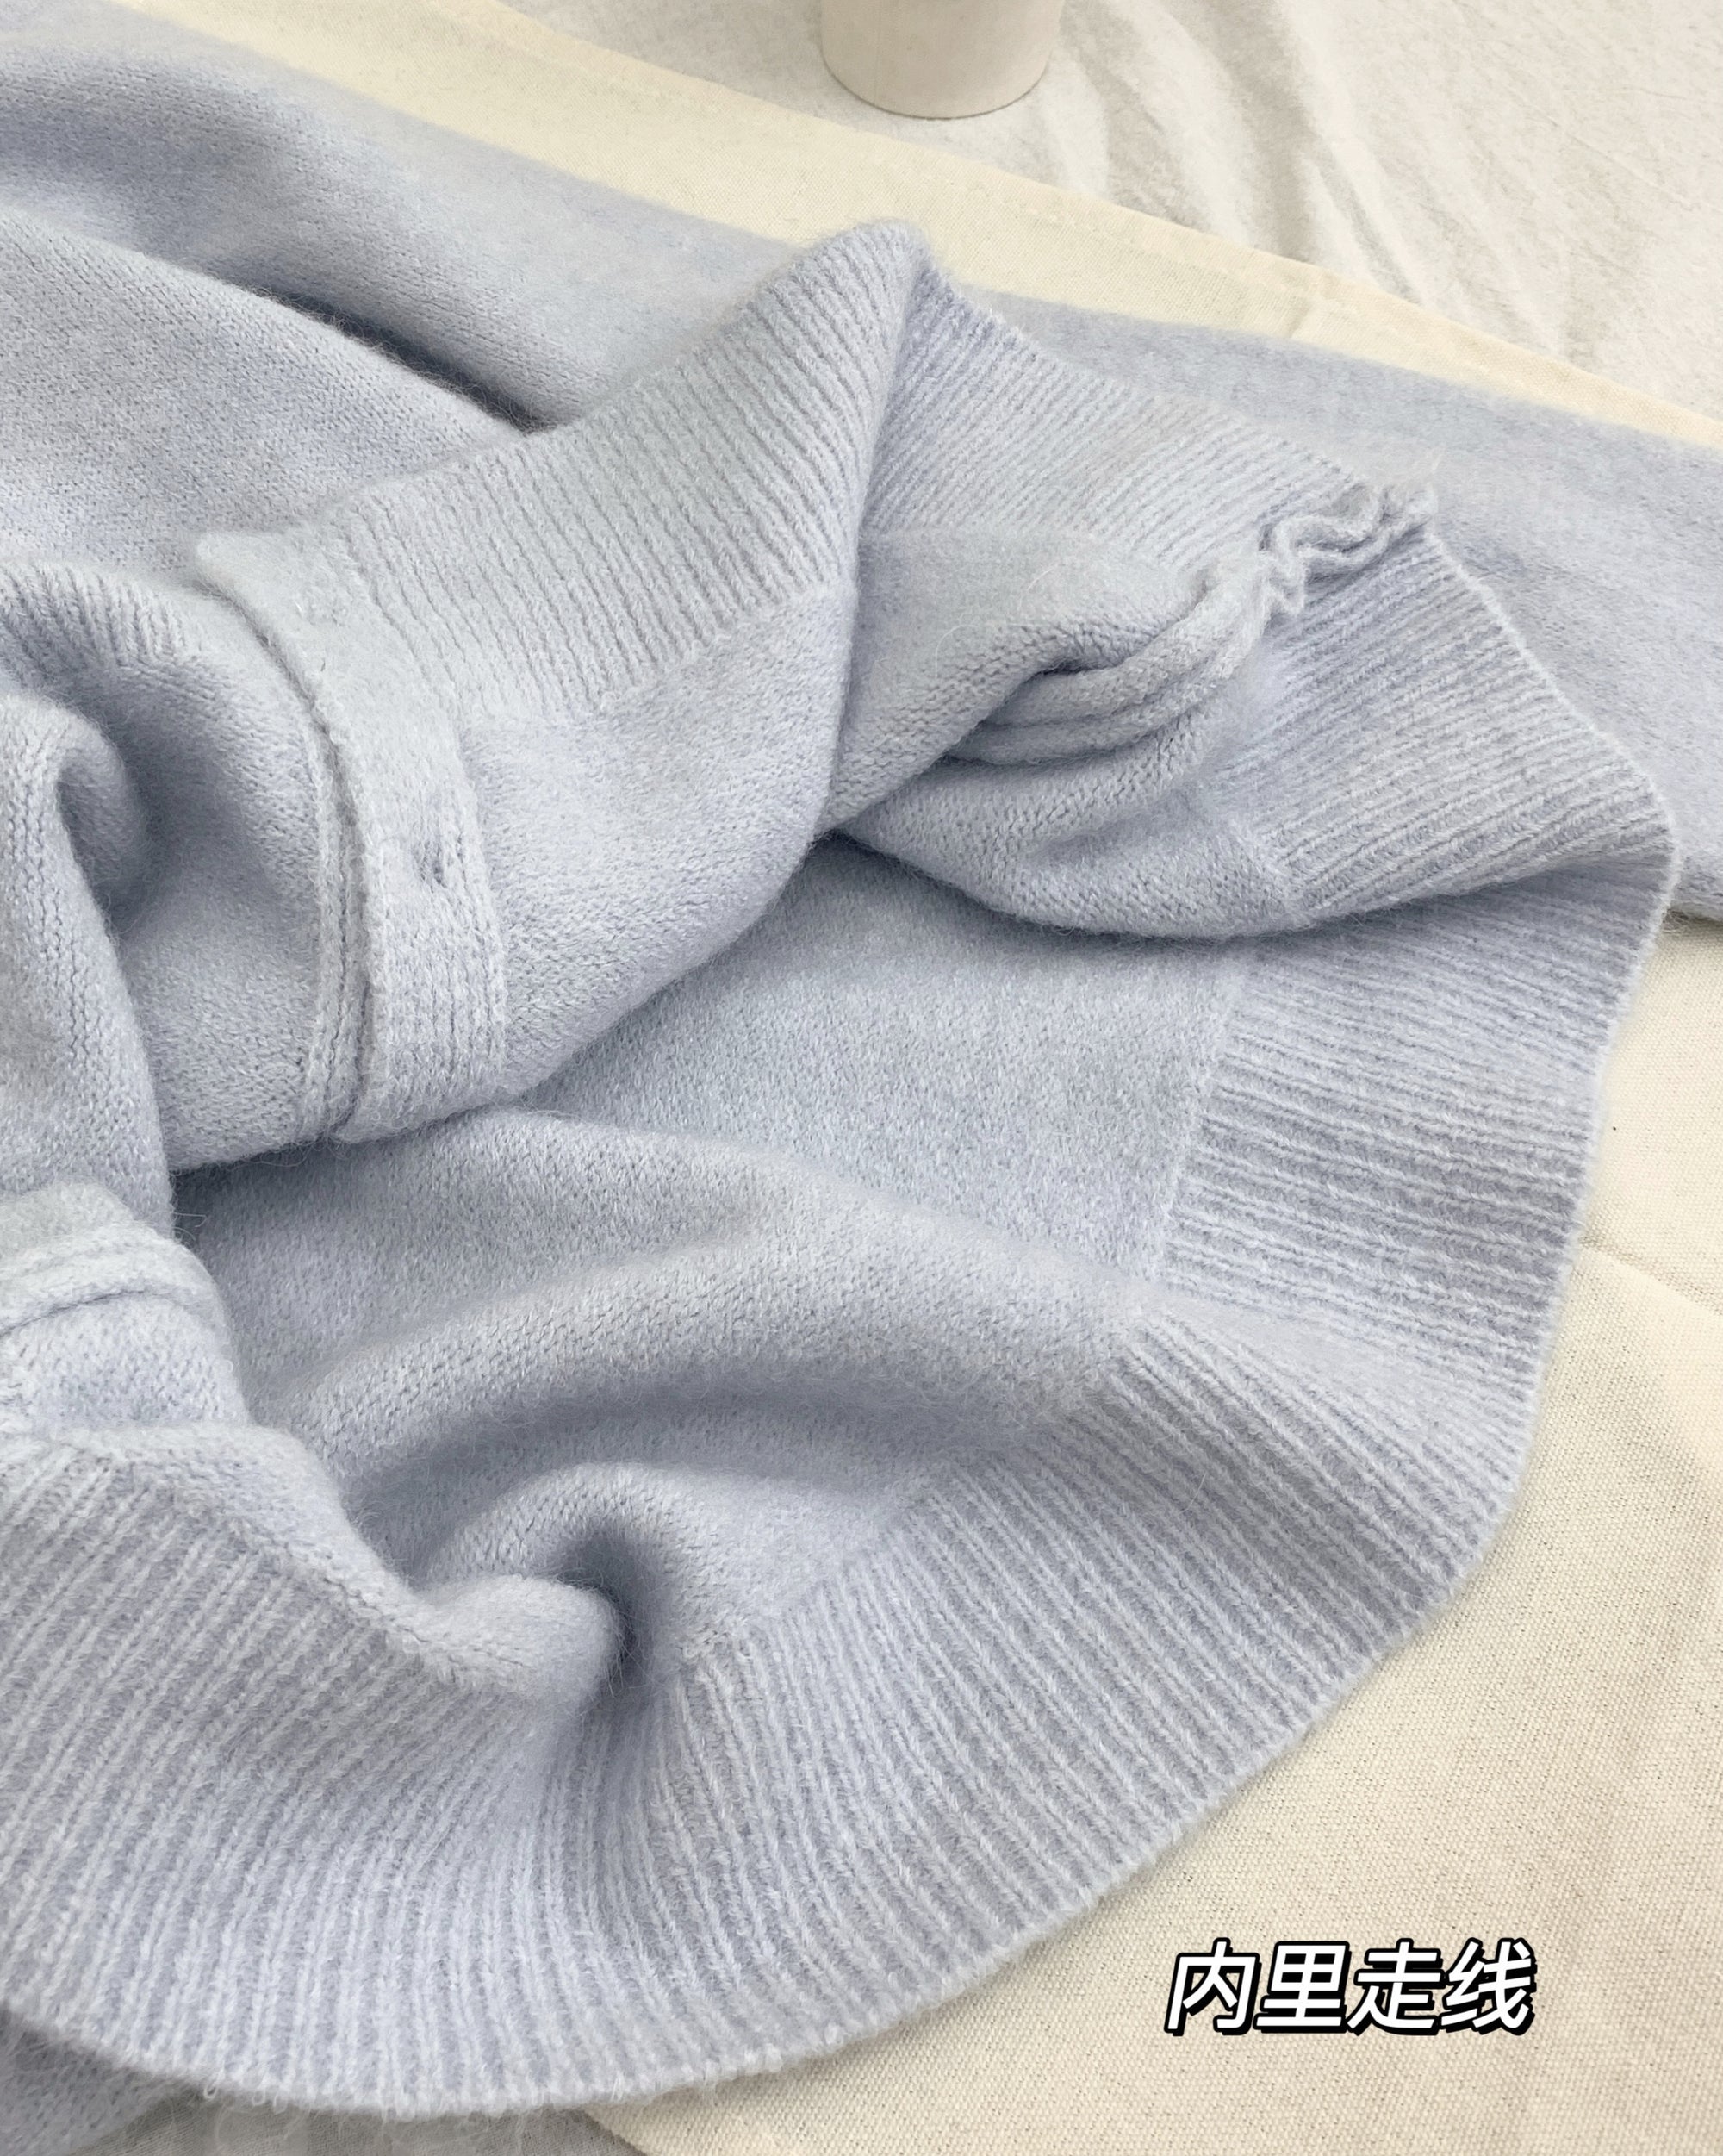 Soft and Cozy Light Blue Korean-Style Knit Sweater